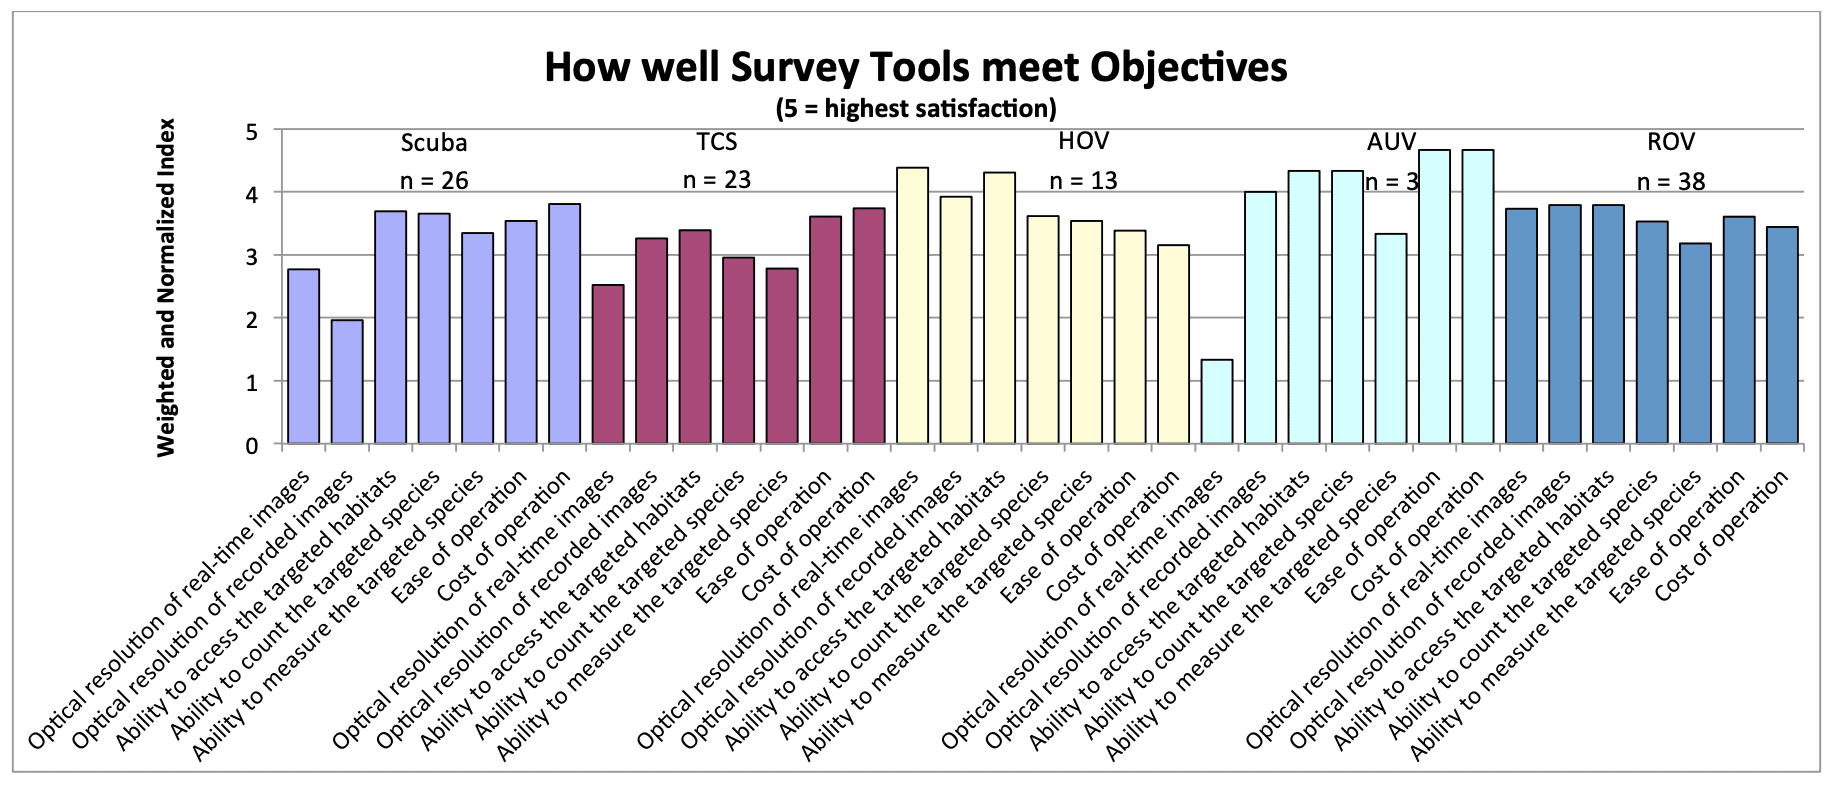 June 2015 - A COMPARATIVE ASSESSMENT OF UNDERWATER VISUAL SURVEY TOOLS: 57